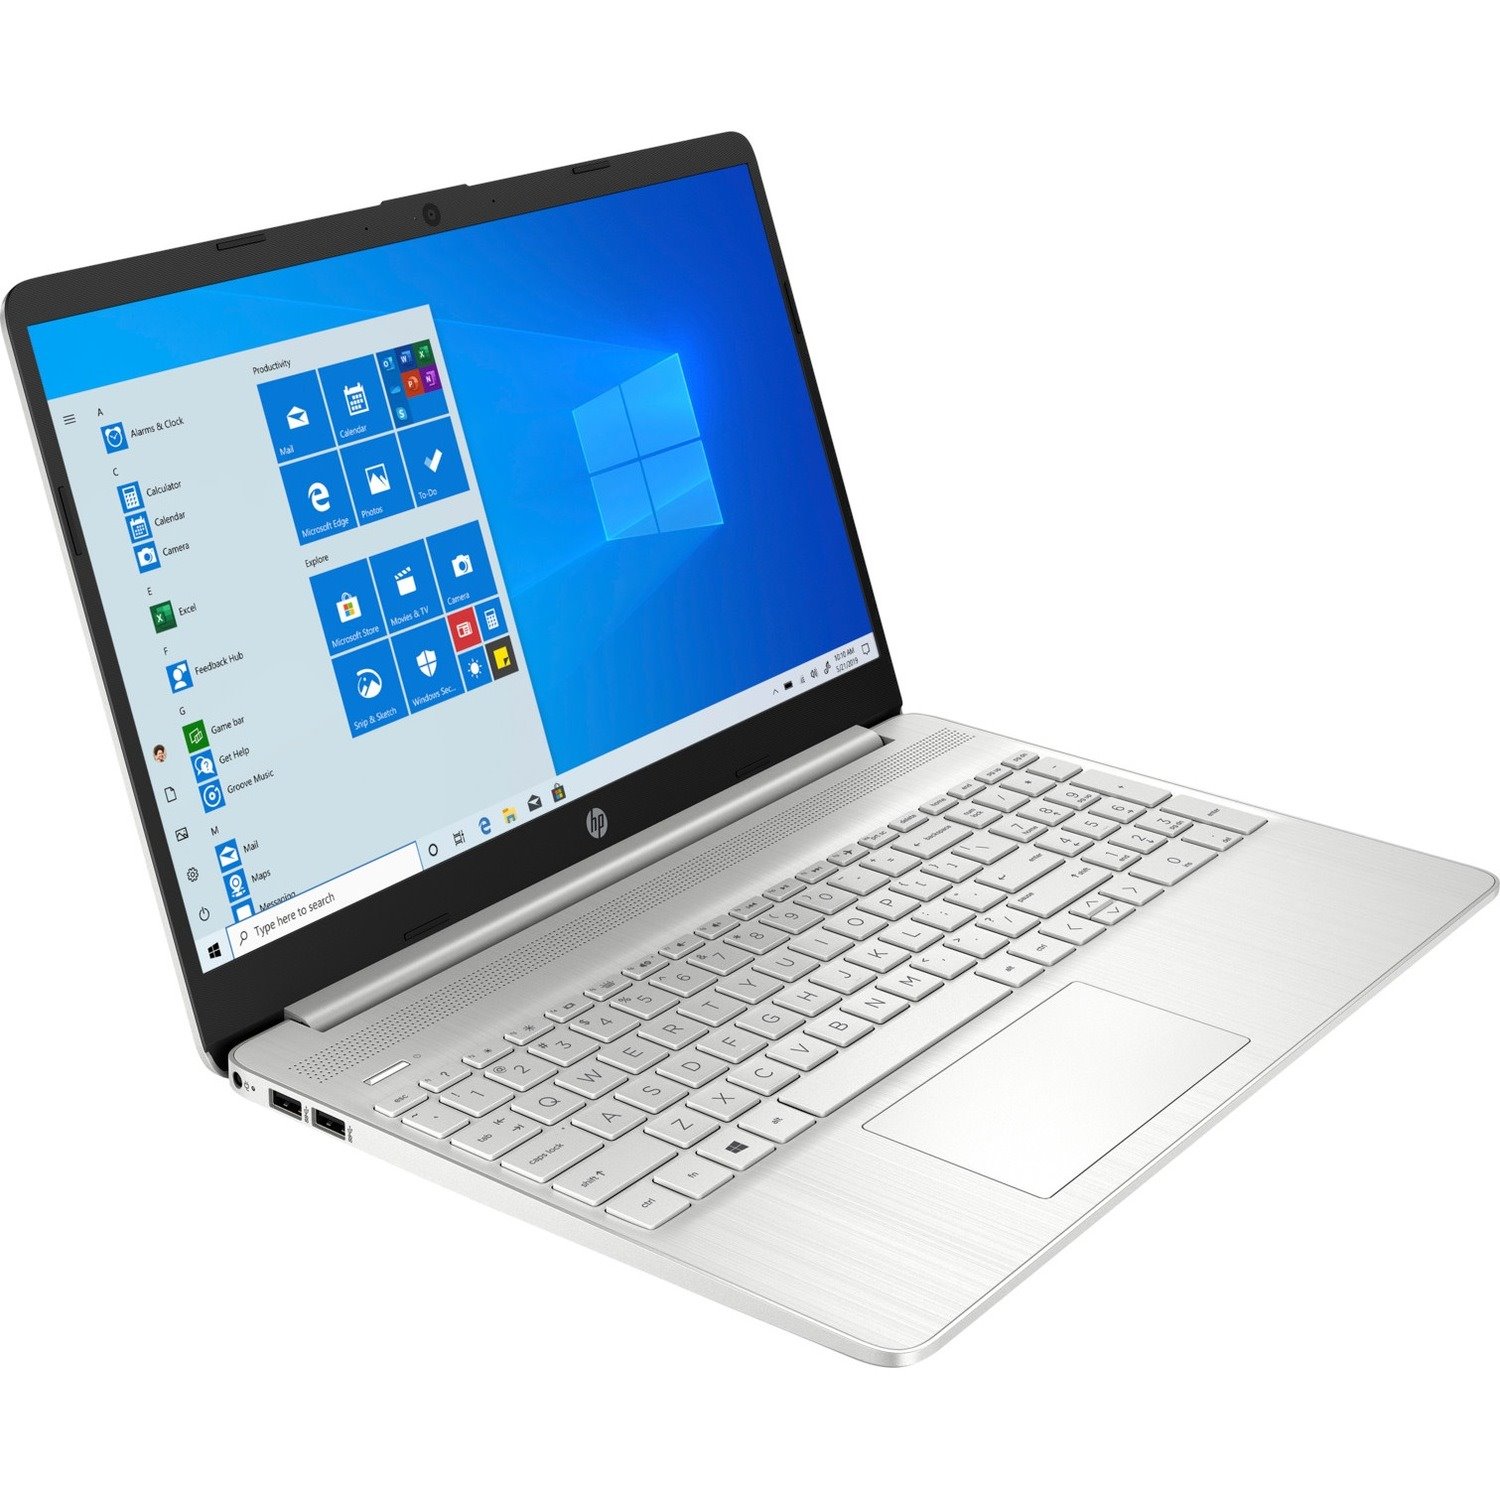 HP 15-d4000 15-dy4013dx 15.6" Touchscreen Notebook - HD - 1366 x 768 - Intel Core i5 11th Gen i5-1155G7 Quad-core (4 Core) 2.50 GHz - 12 GB Total RAM - 256 GB SSD - Natural Silver - Refurbished